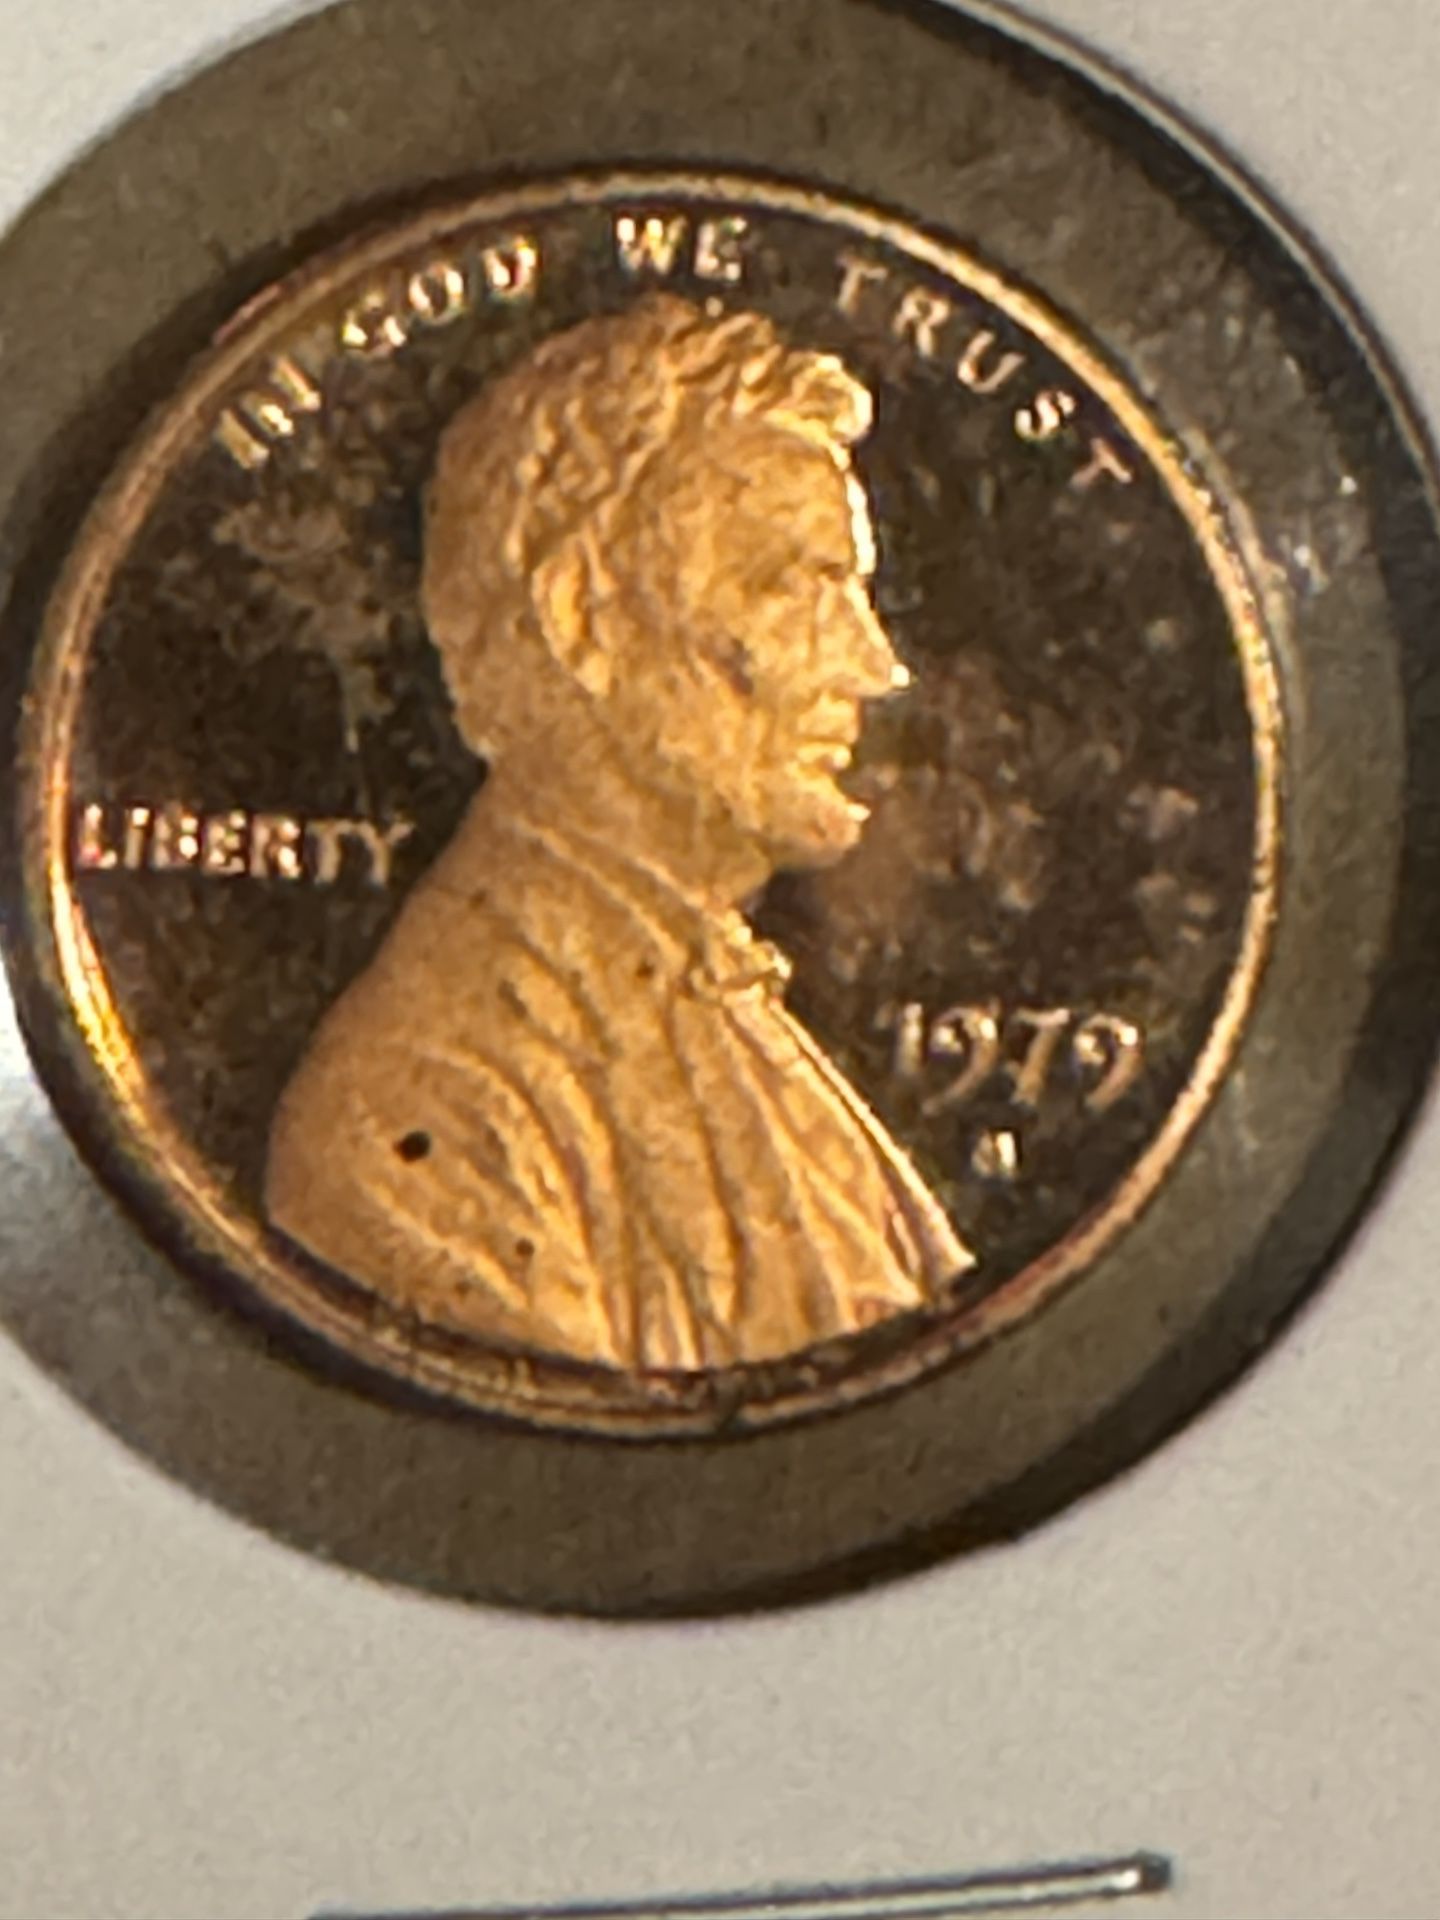 1979 S Lincoln Memorial Cent Type 1